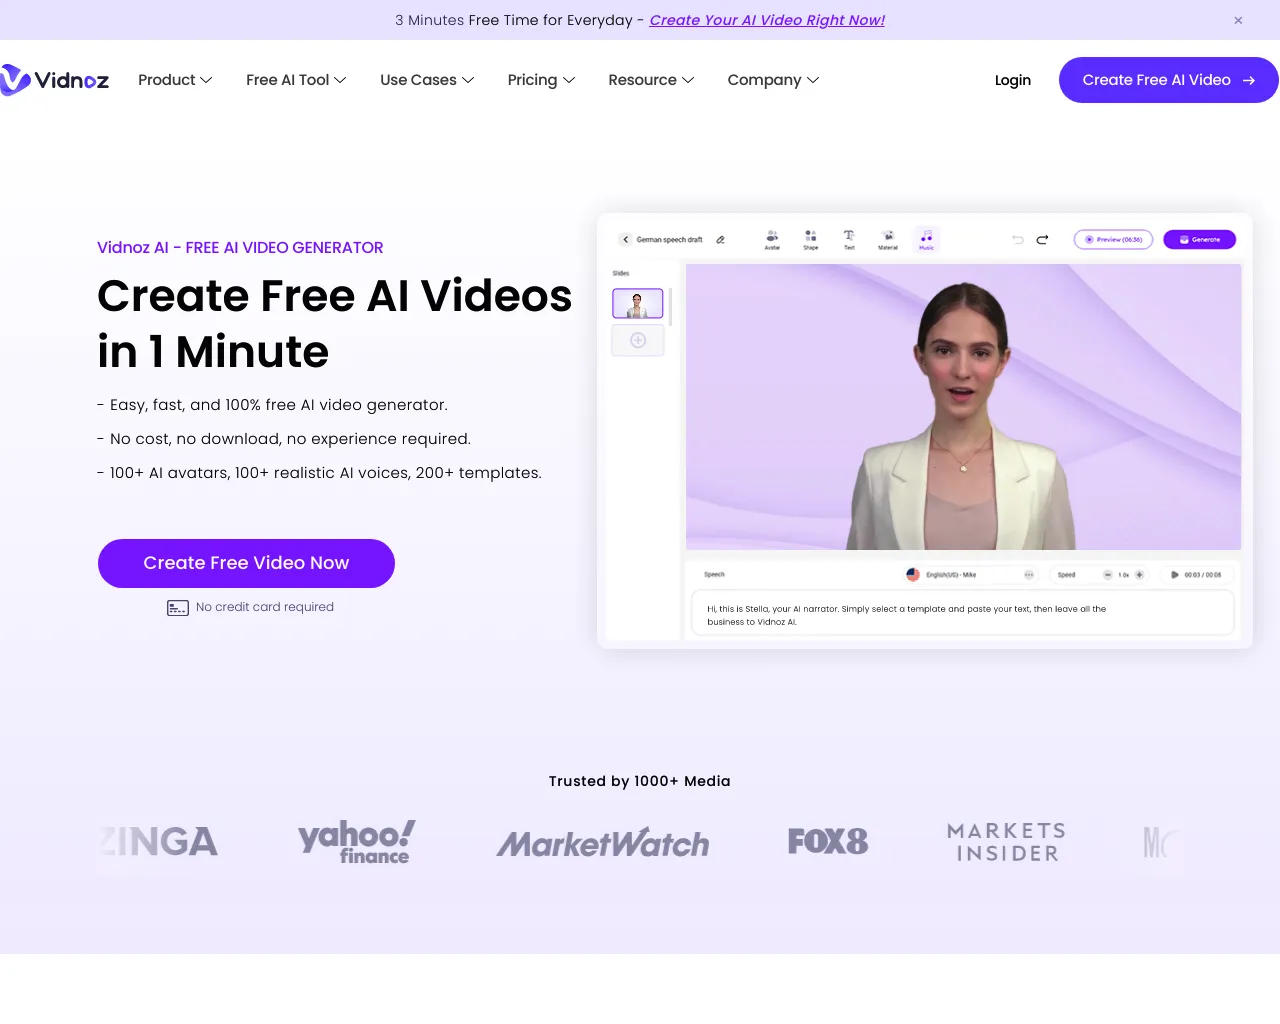 Vidnoz AI: Introducing a Free AI Video Platform to Cut Users'' Costs by 80% and Boost 10X Productivity